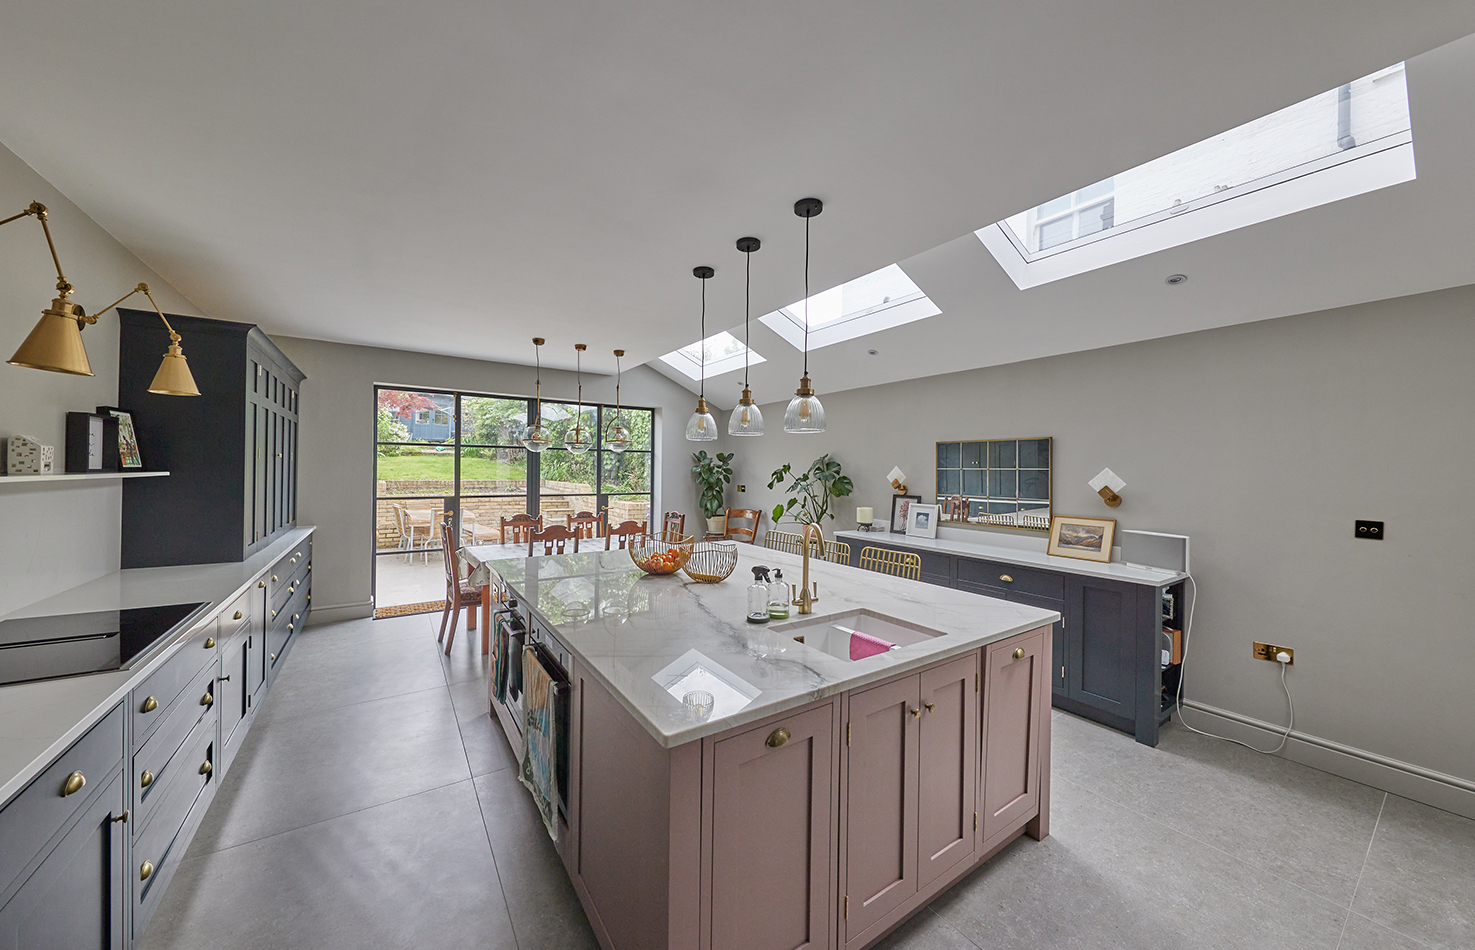 Fawnbrake Avenue - Internal image of a run of neo rooflights above a contemporary kitchen - Homeowners Hub Inspiration. Helpful Guides: Flat versus pitched rooflights